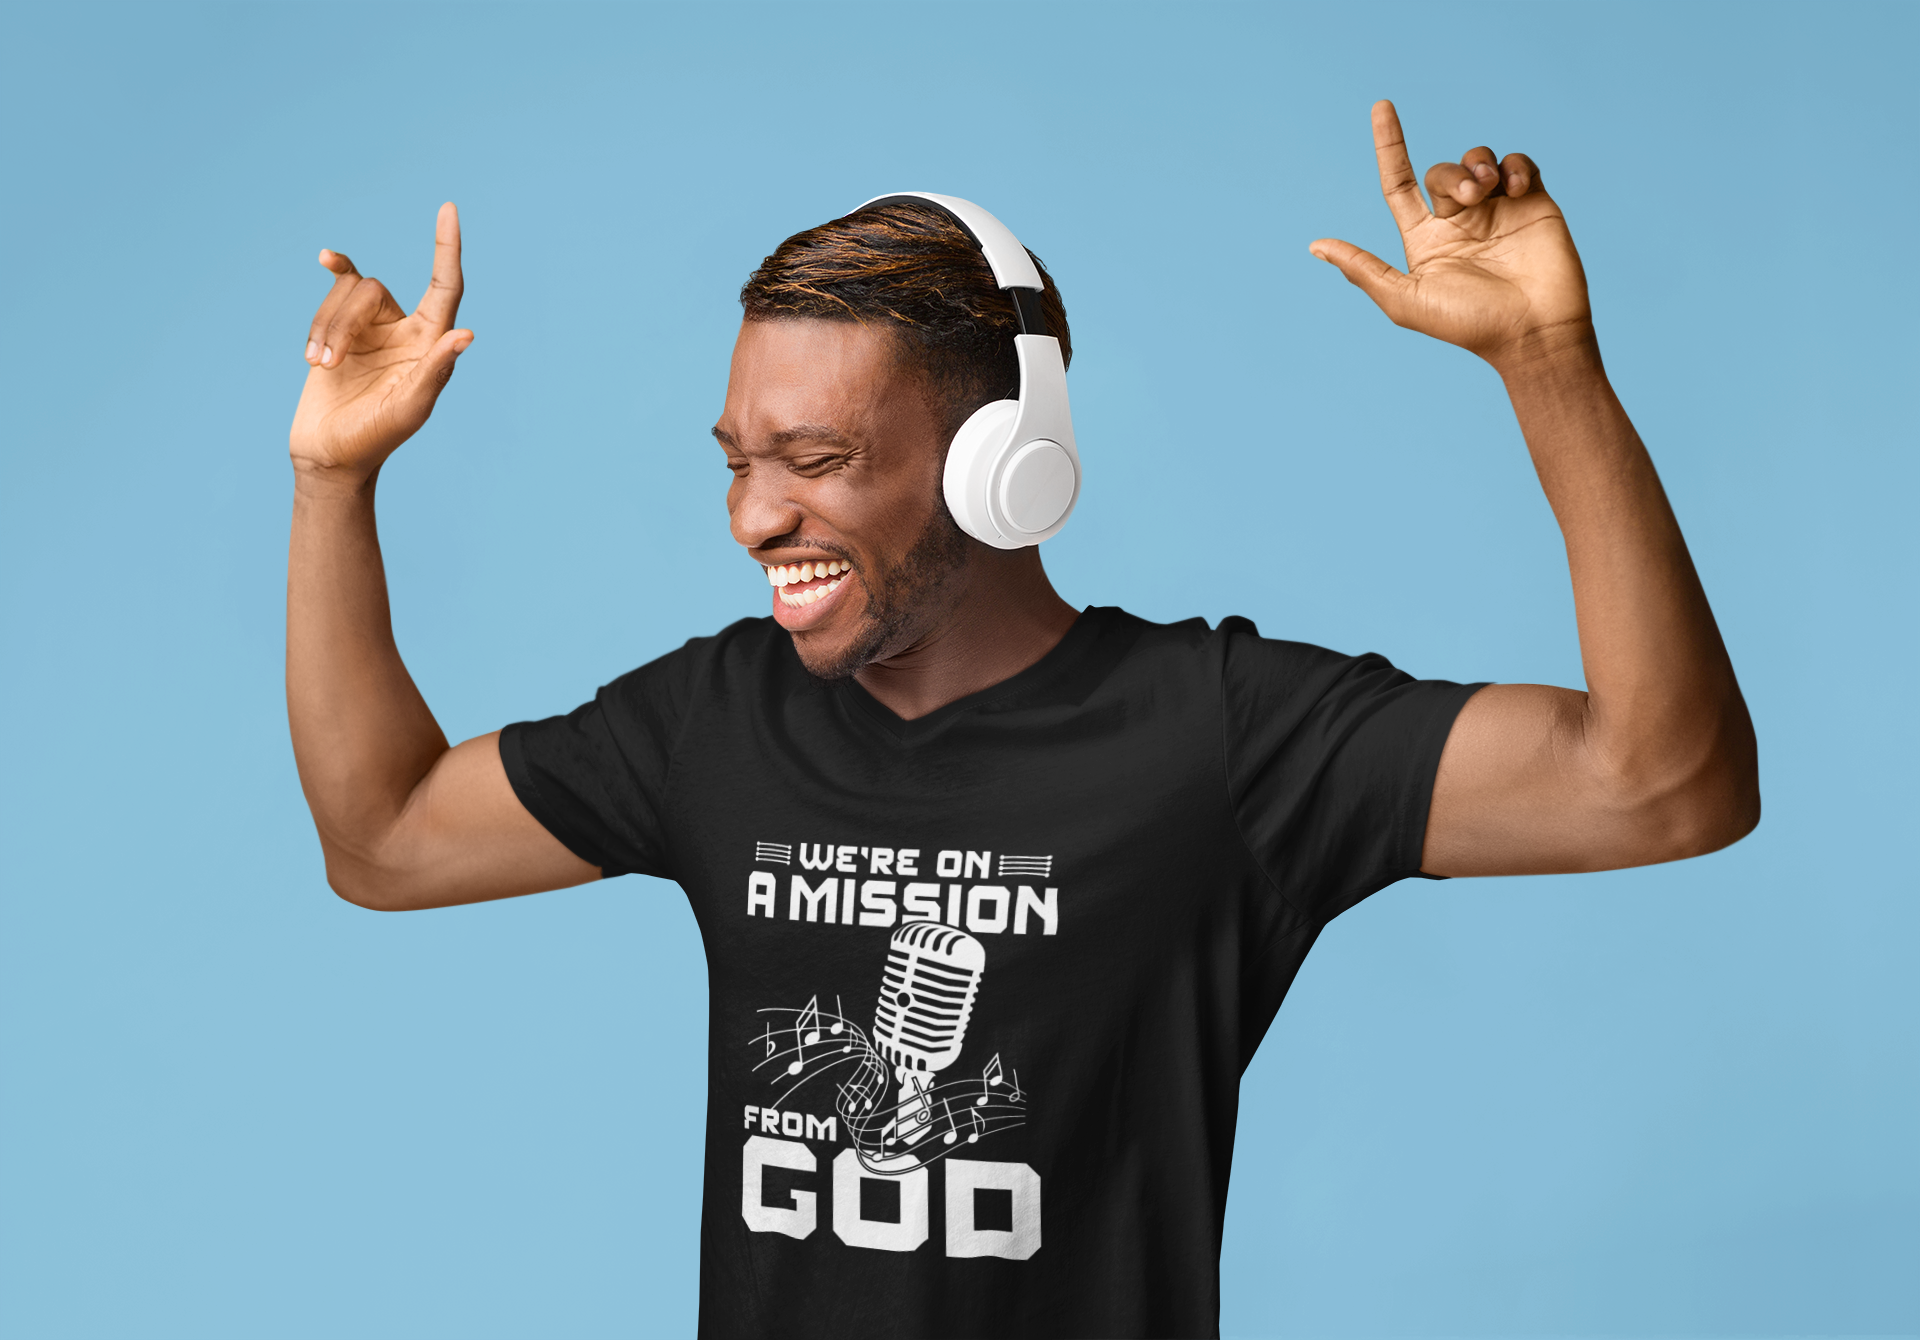 We're On A Mission From God Tshirt - Donkey Tees